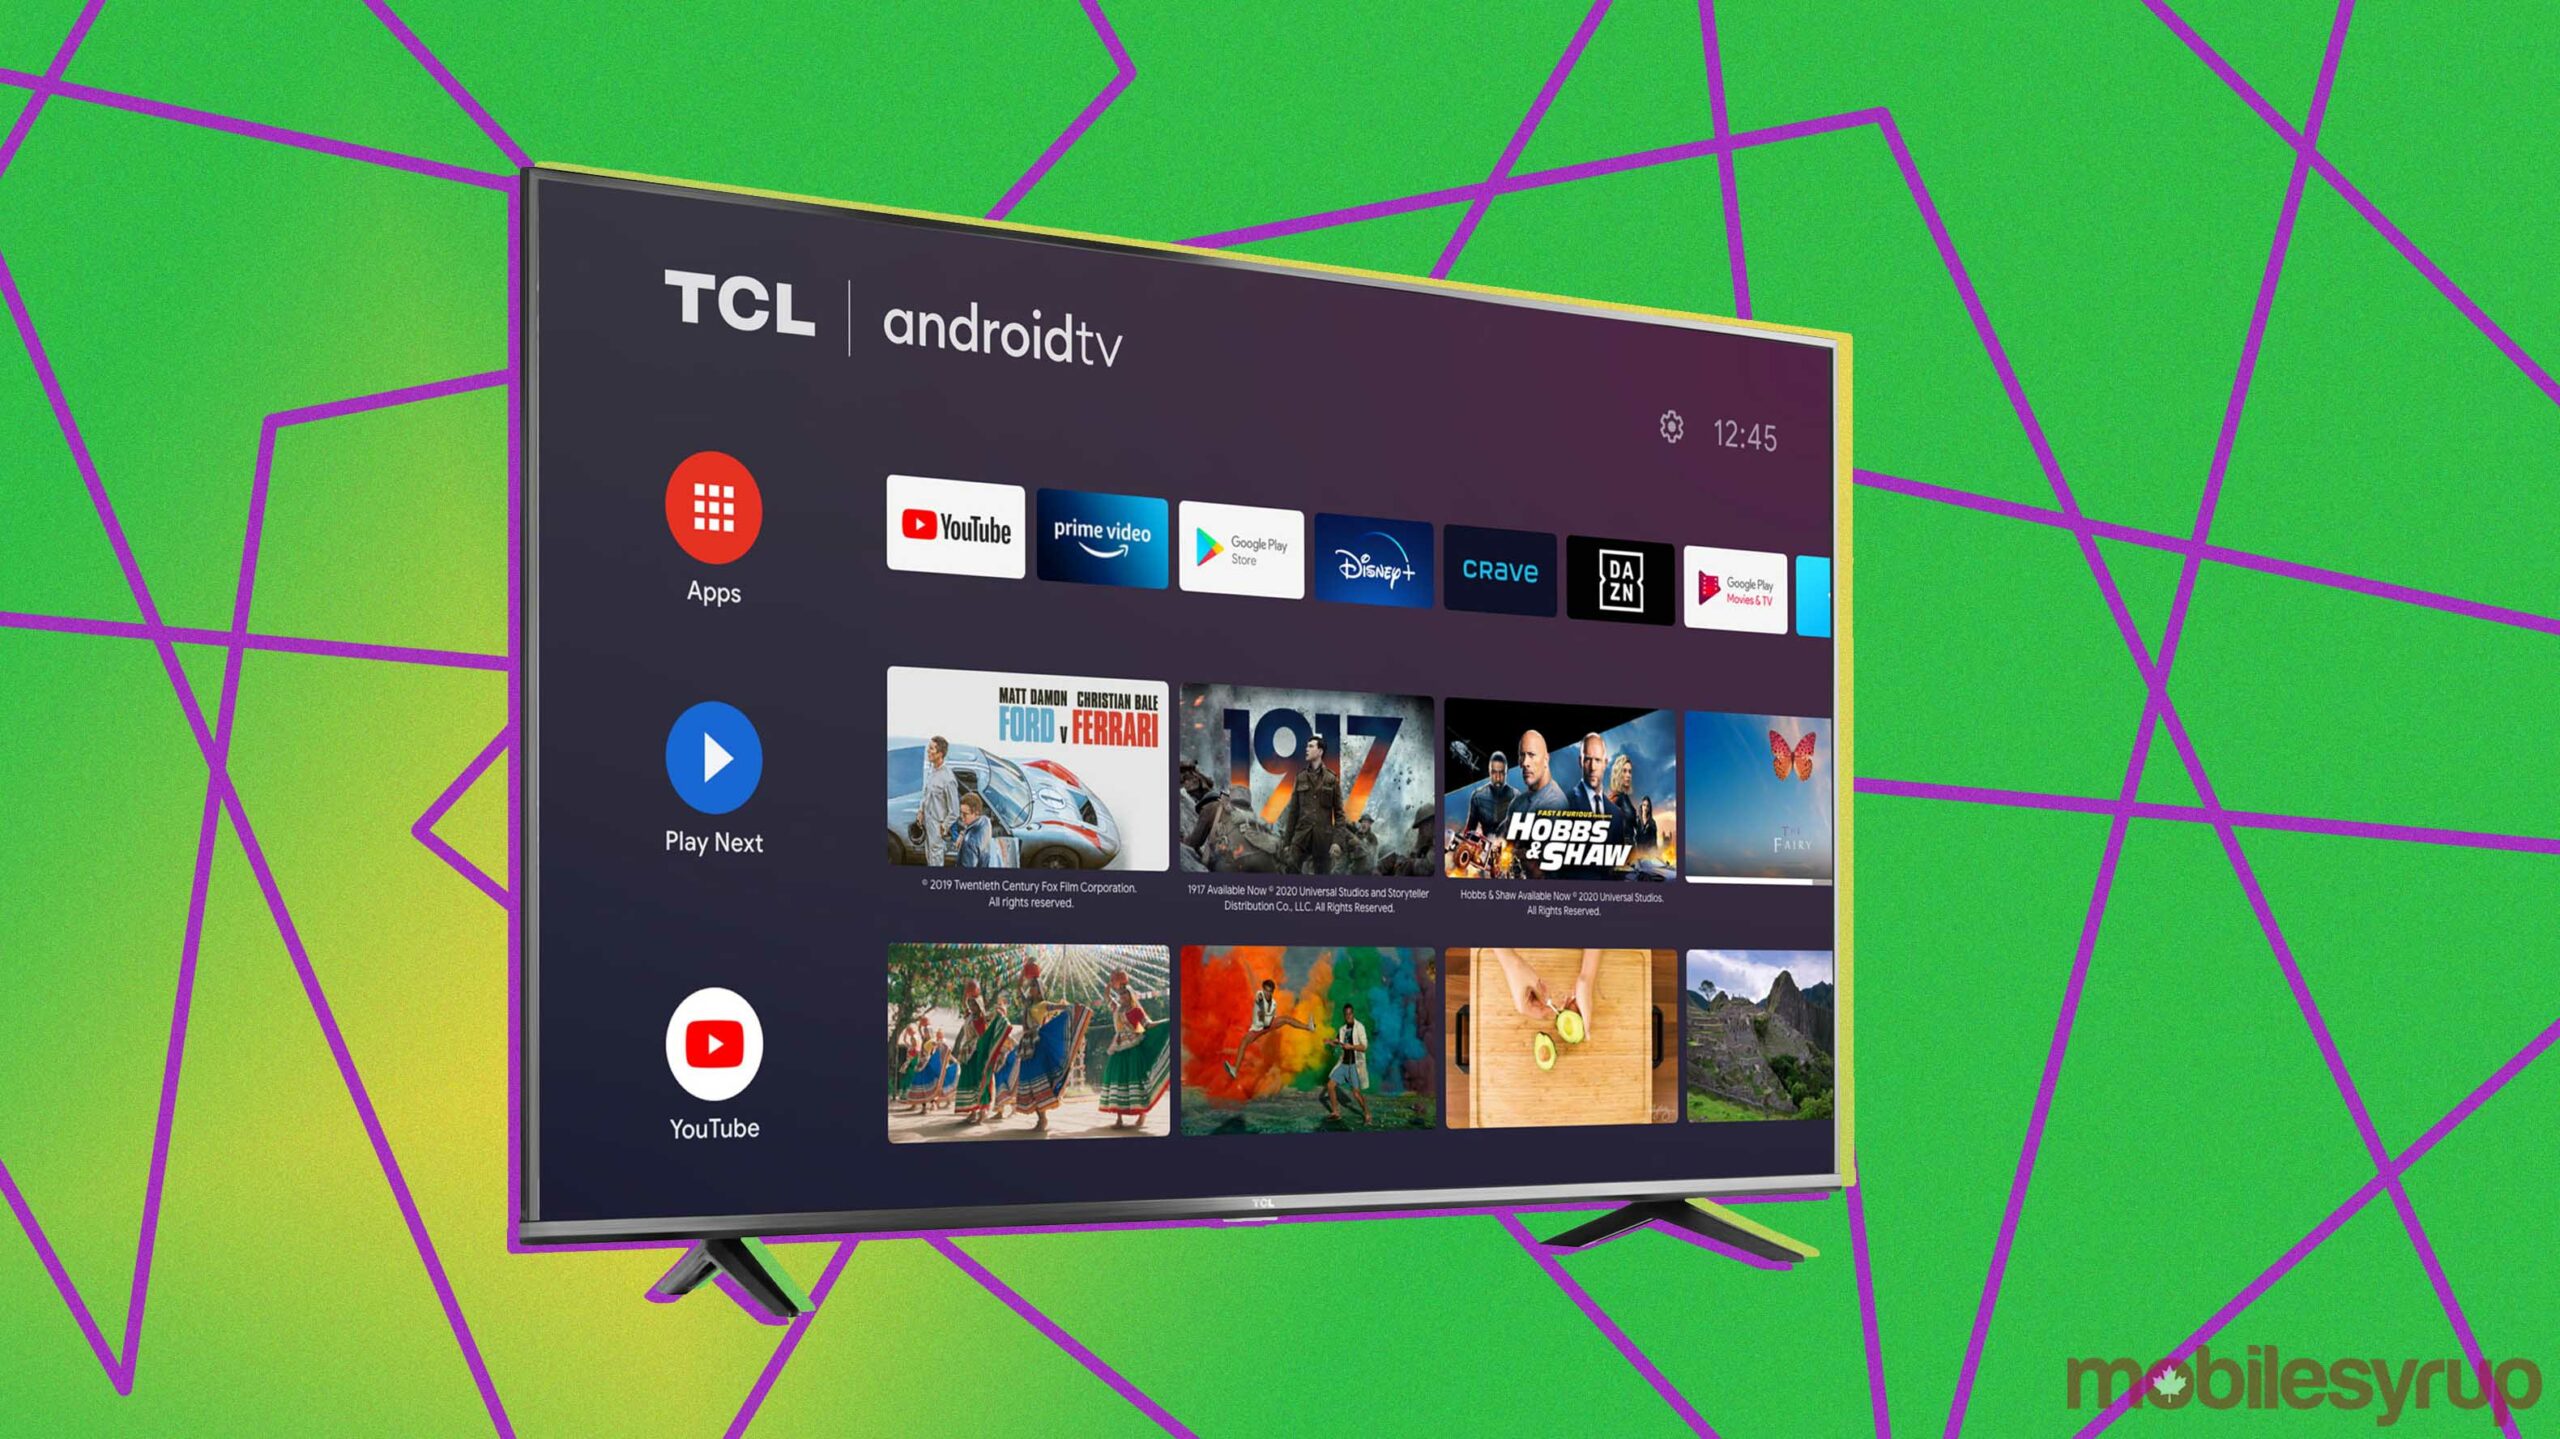 TCL Android TV. ТСЛ телевизор андроид. TCL 40se. Android TV TCL за 11 000. Tcl телевизор блютуз